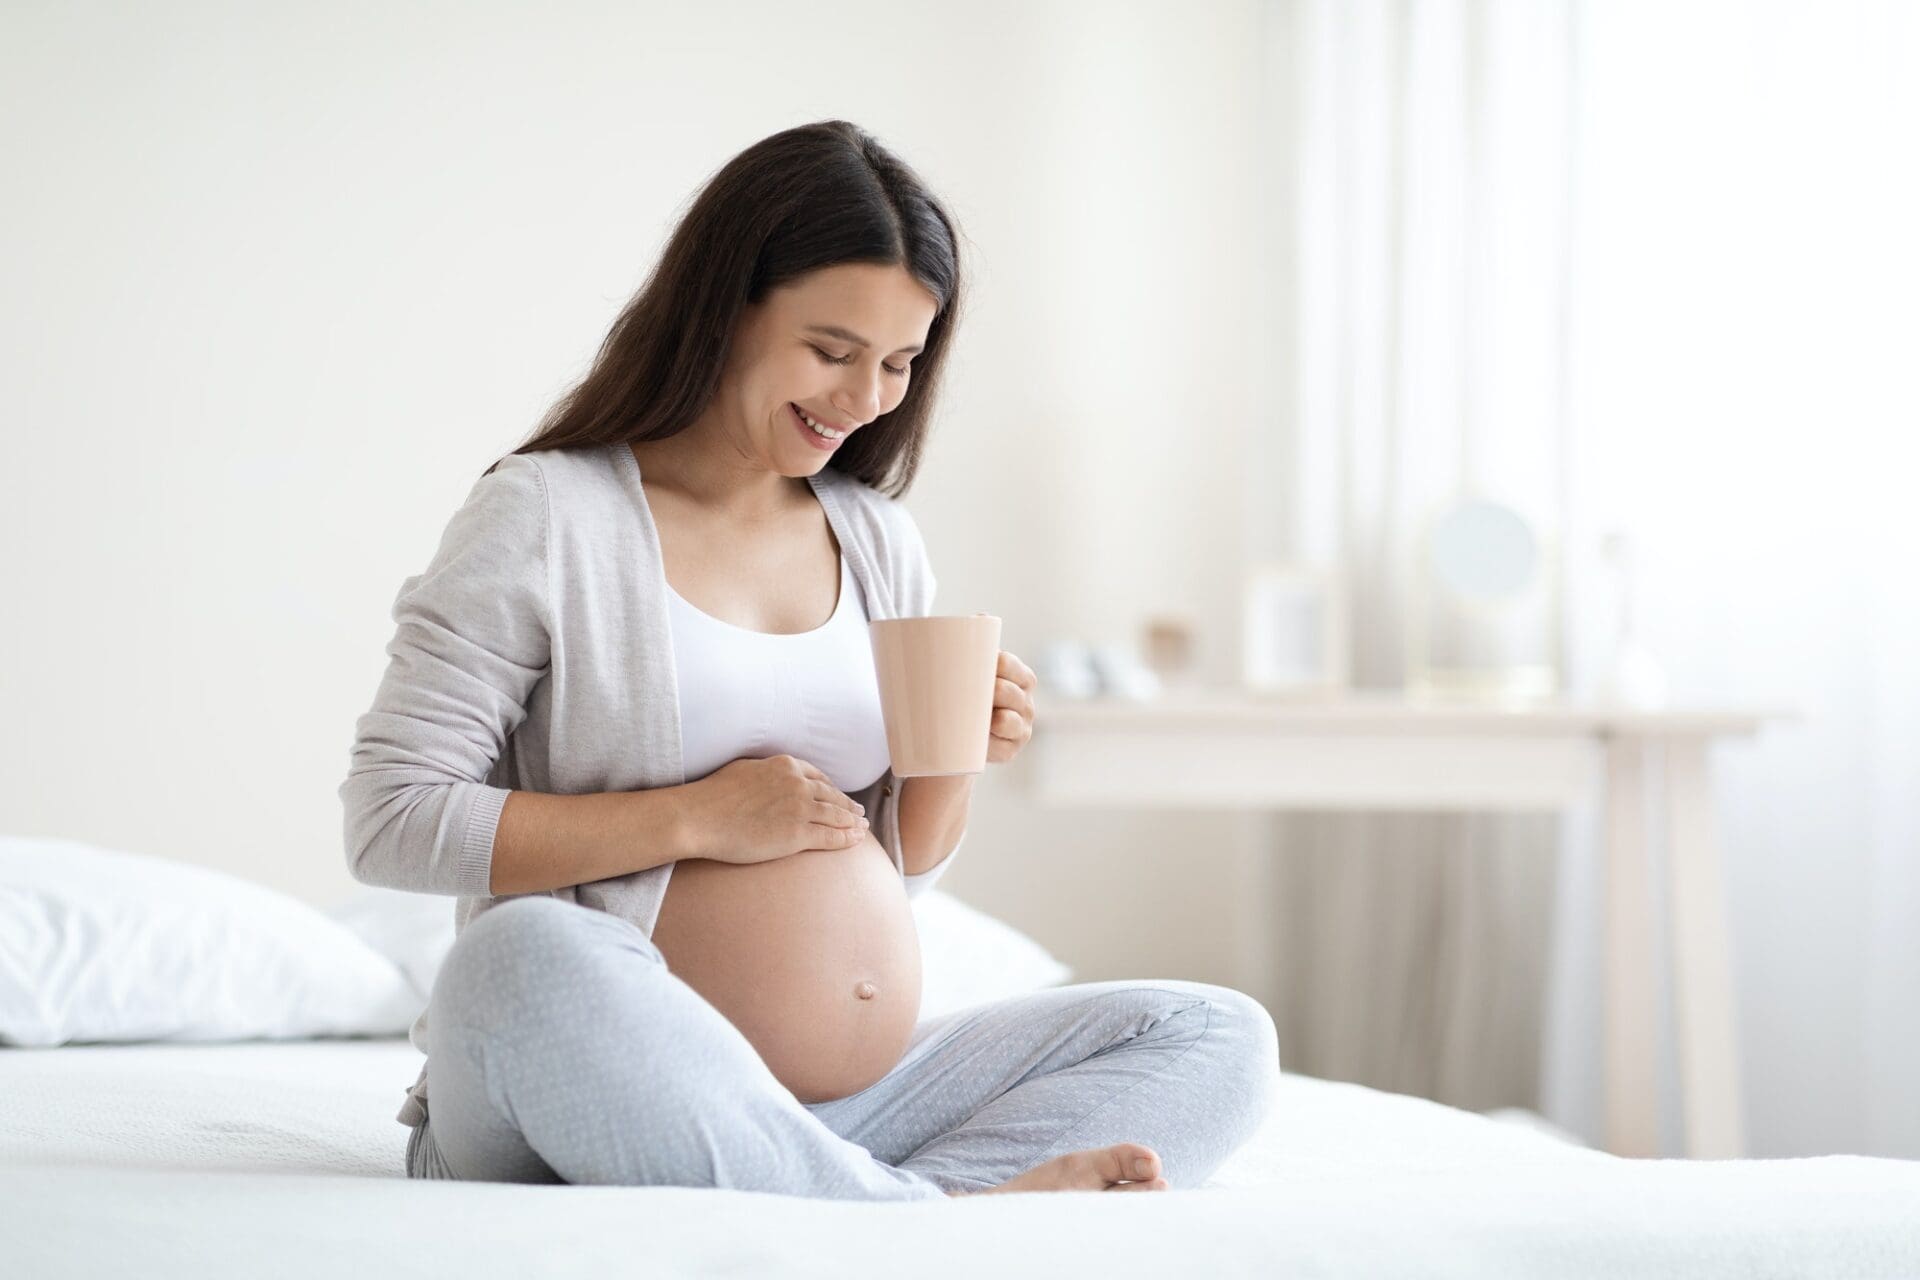 Smiling pregnant woman sitting on bed, drinking tea